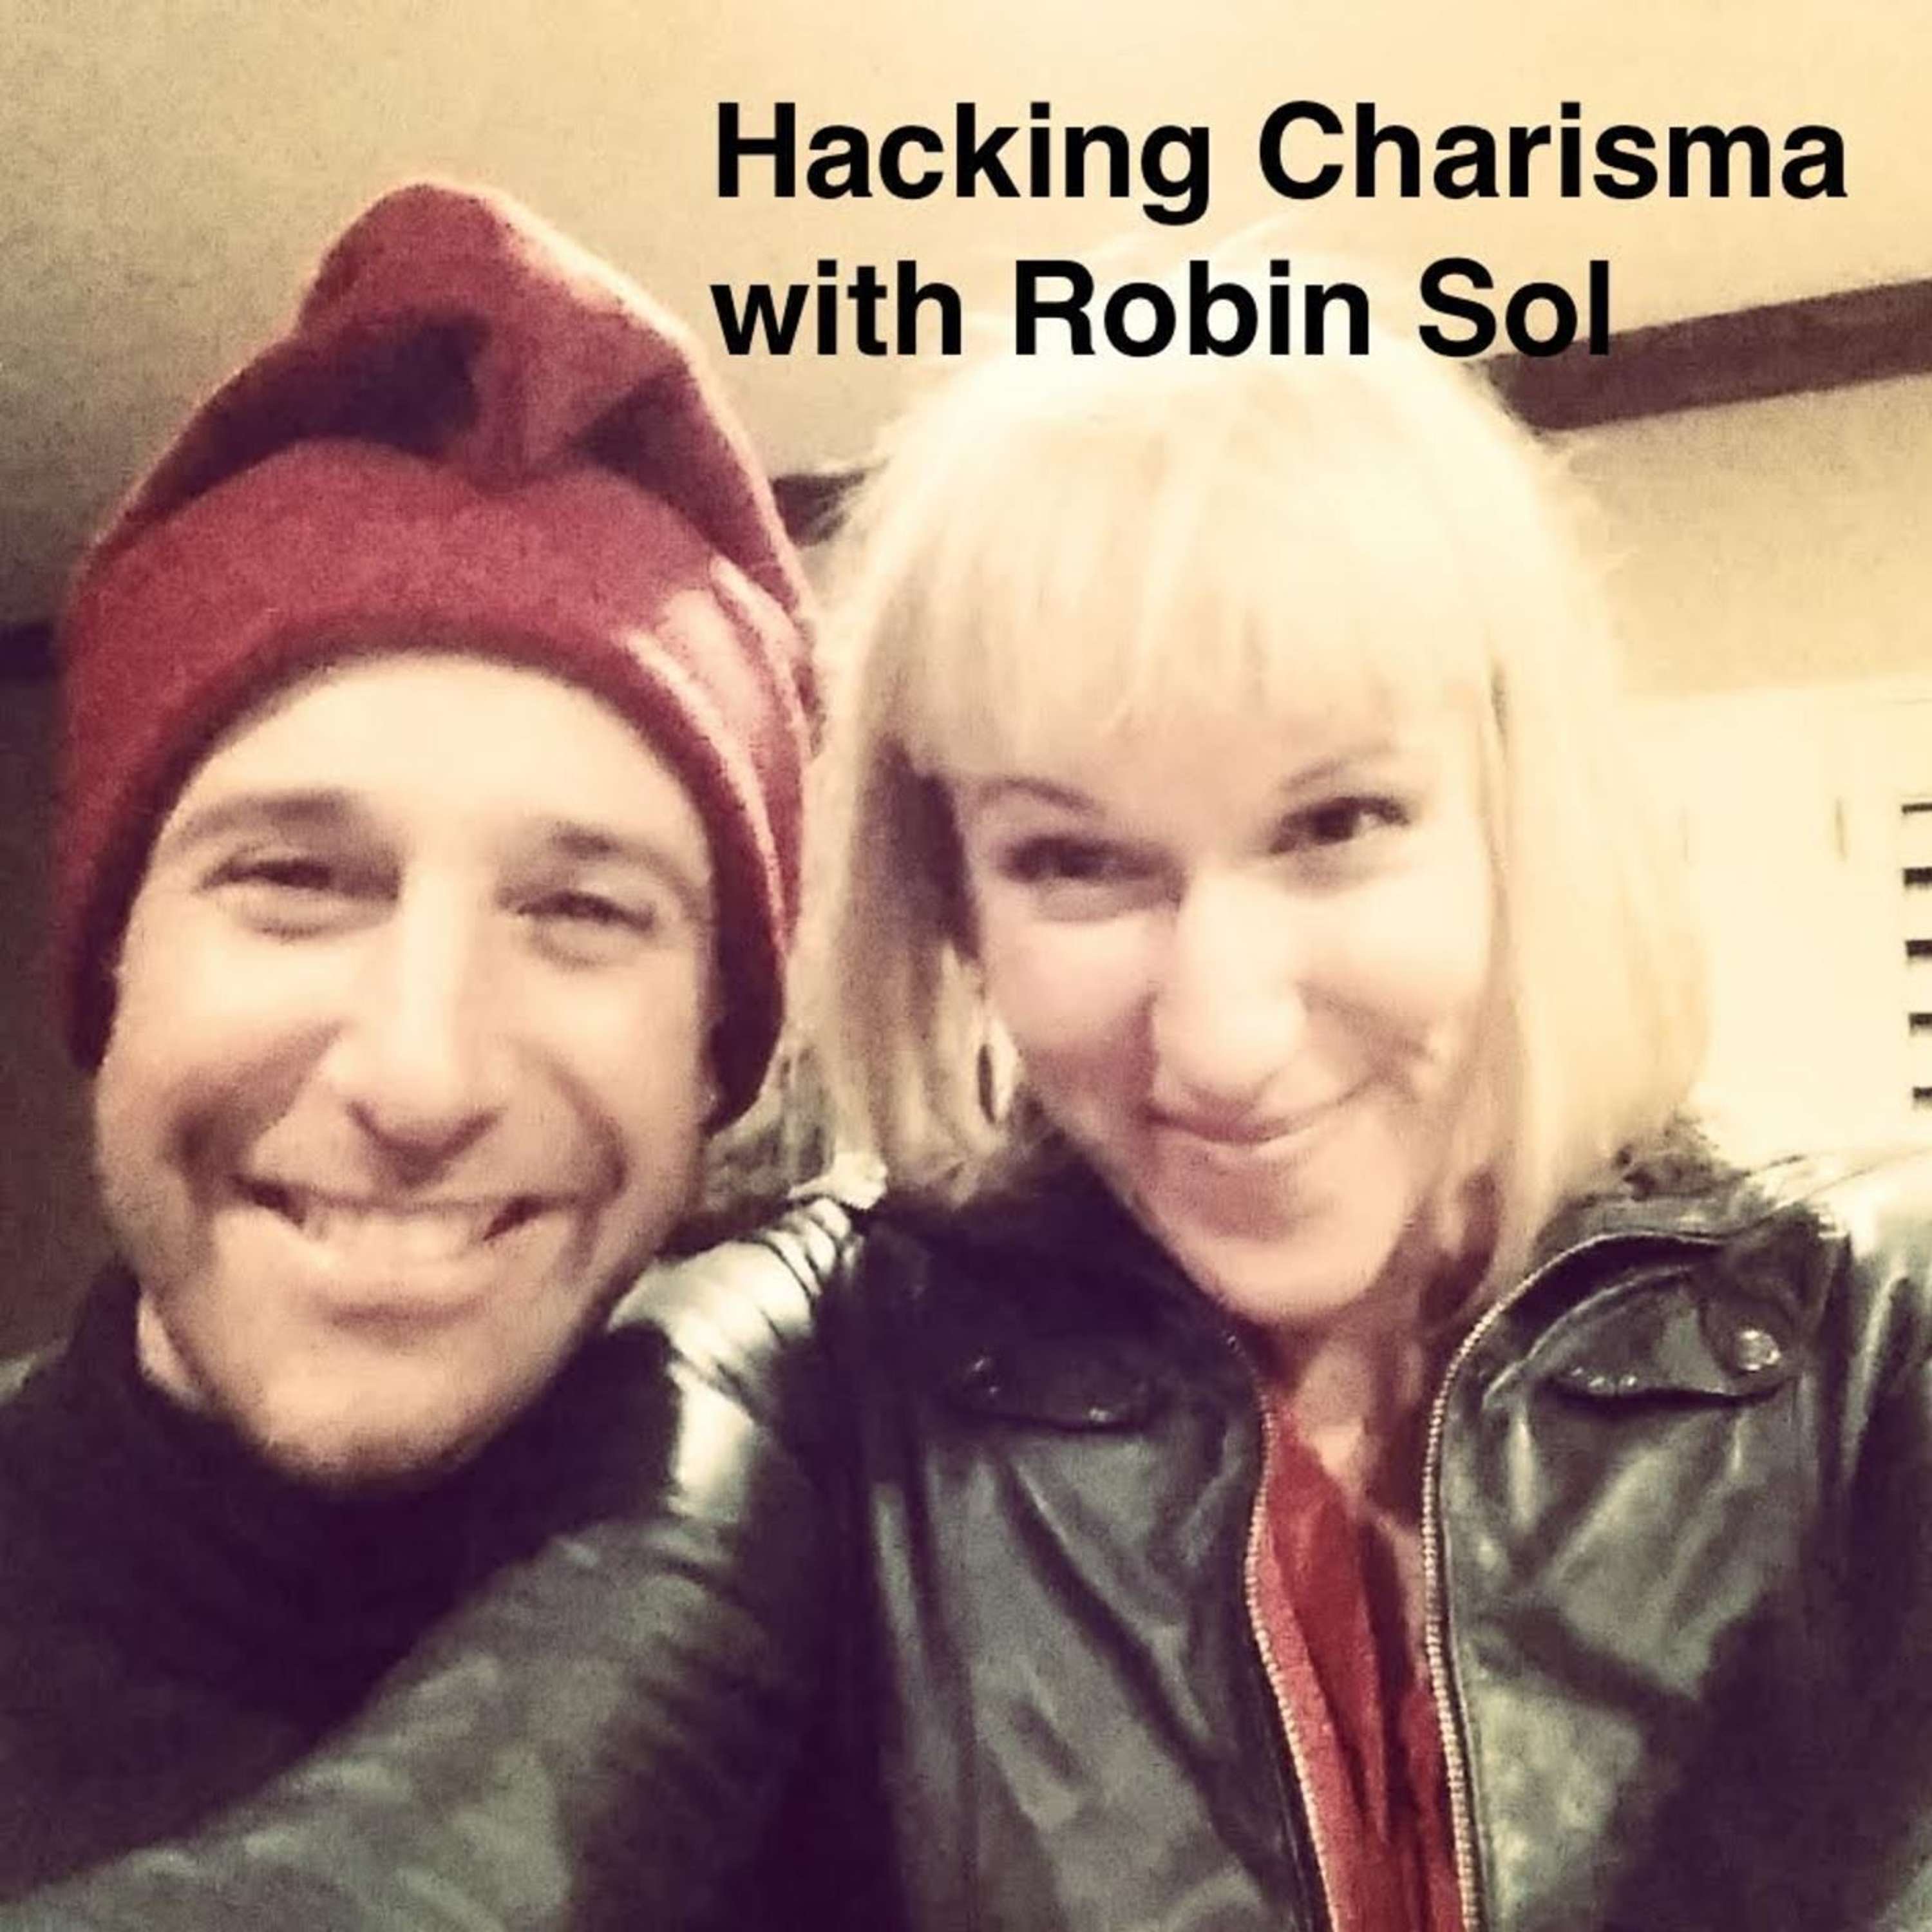 Hacking Charisma with Robin Sol